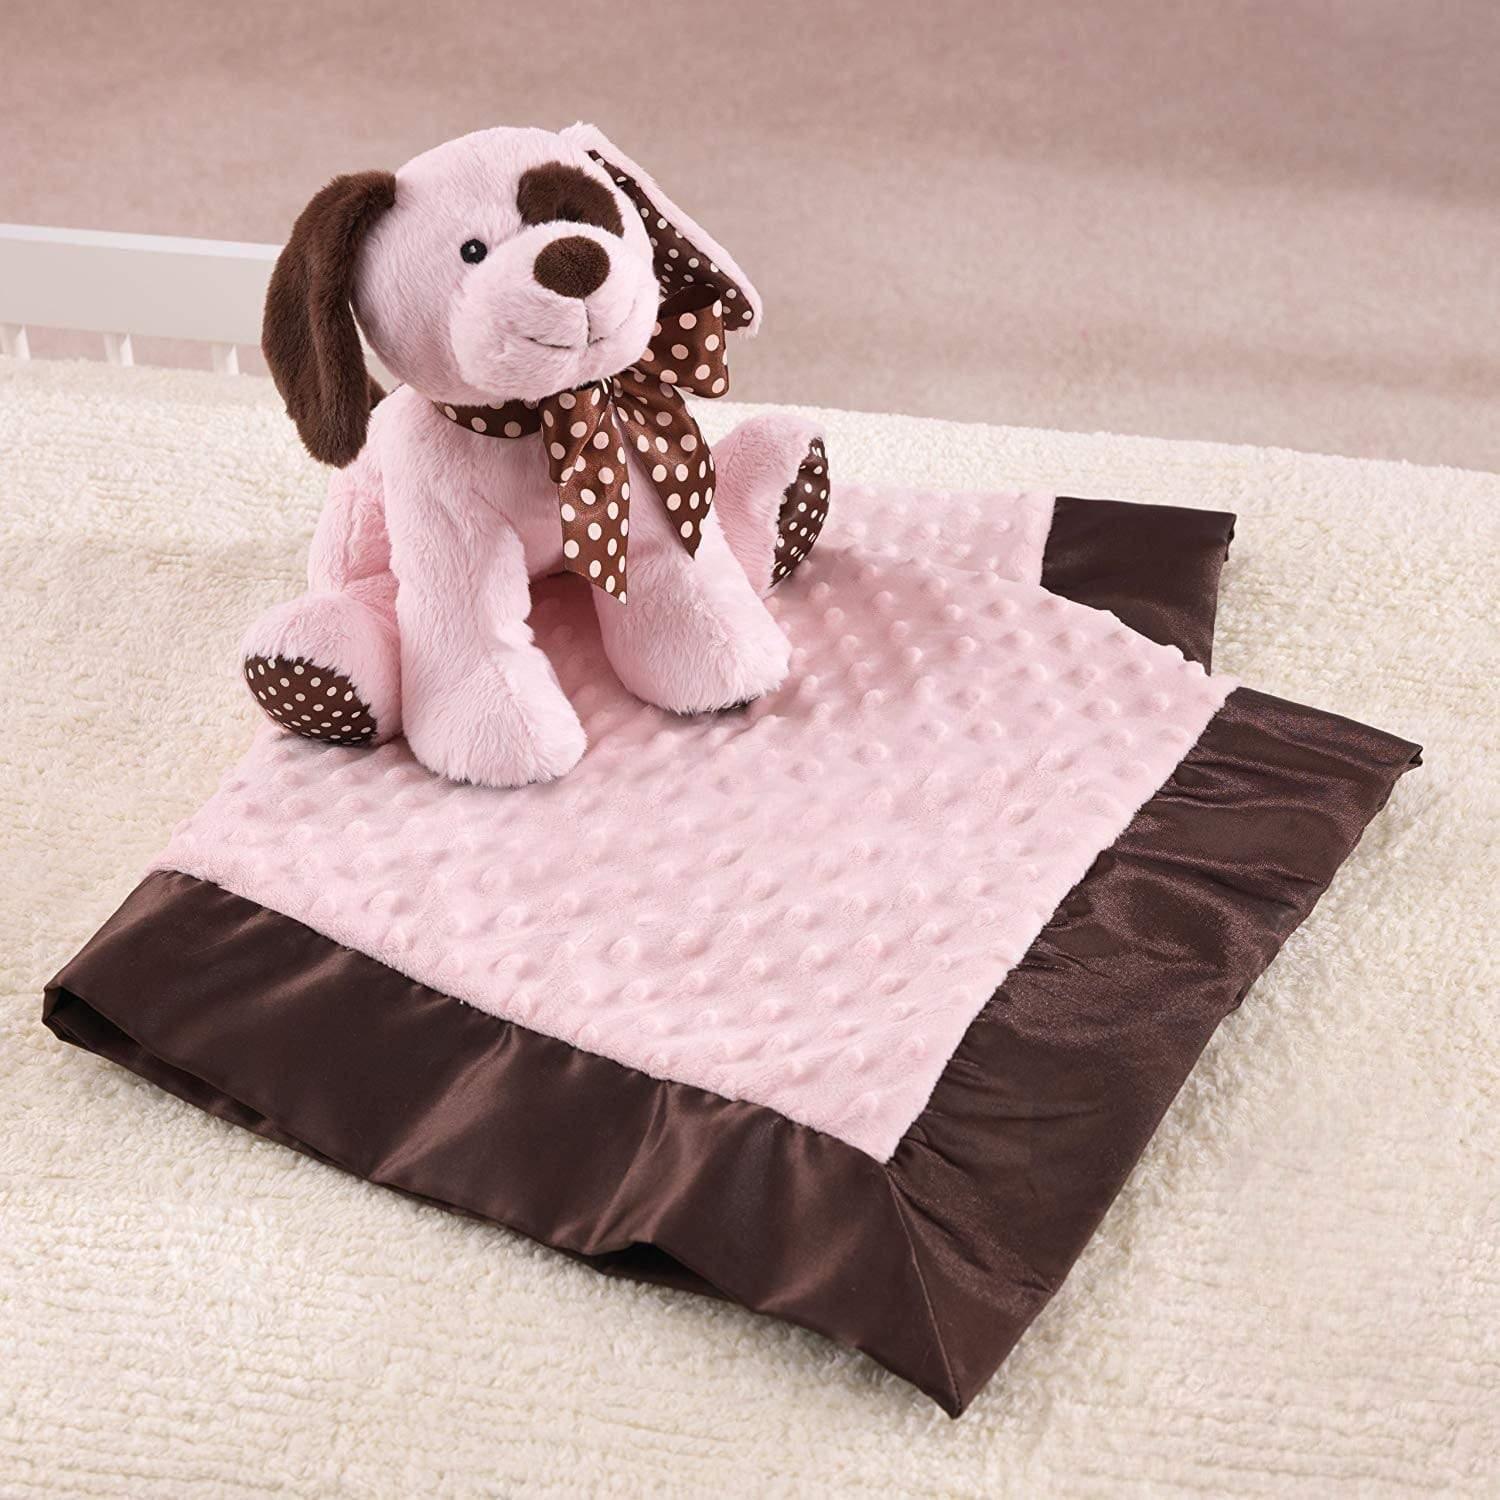 "Winky" the 10.5in Pink Plush Puppy and Blanket Set by KidKraft